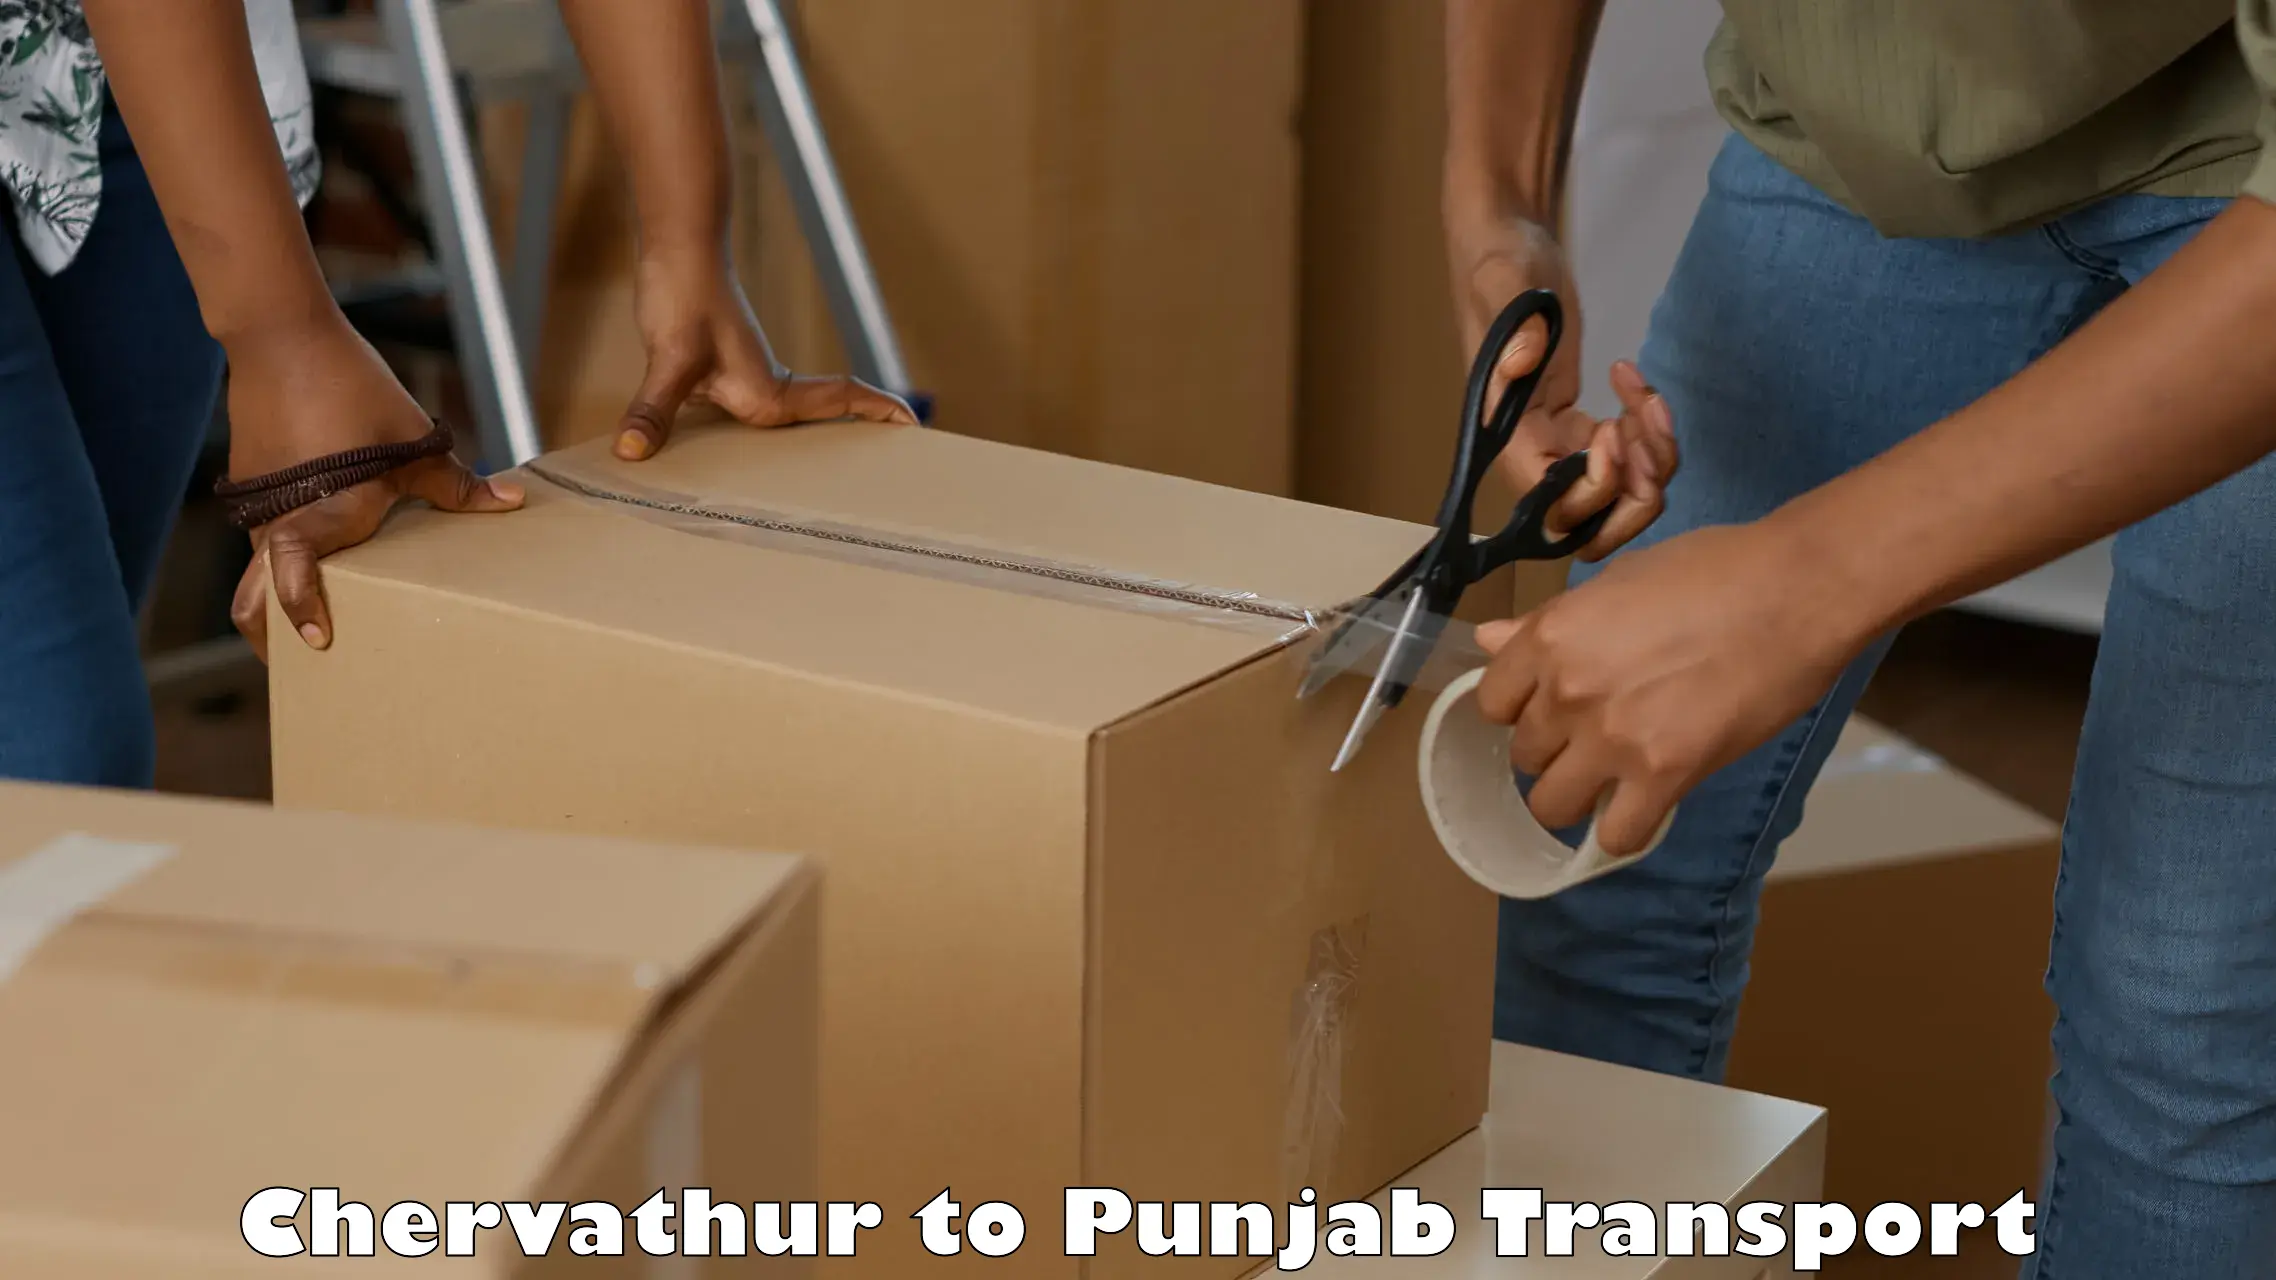 Truck transport companies in India Chervathur to Abohar